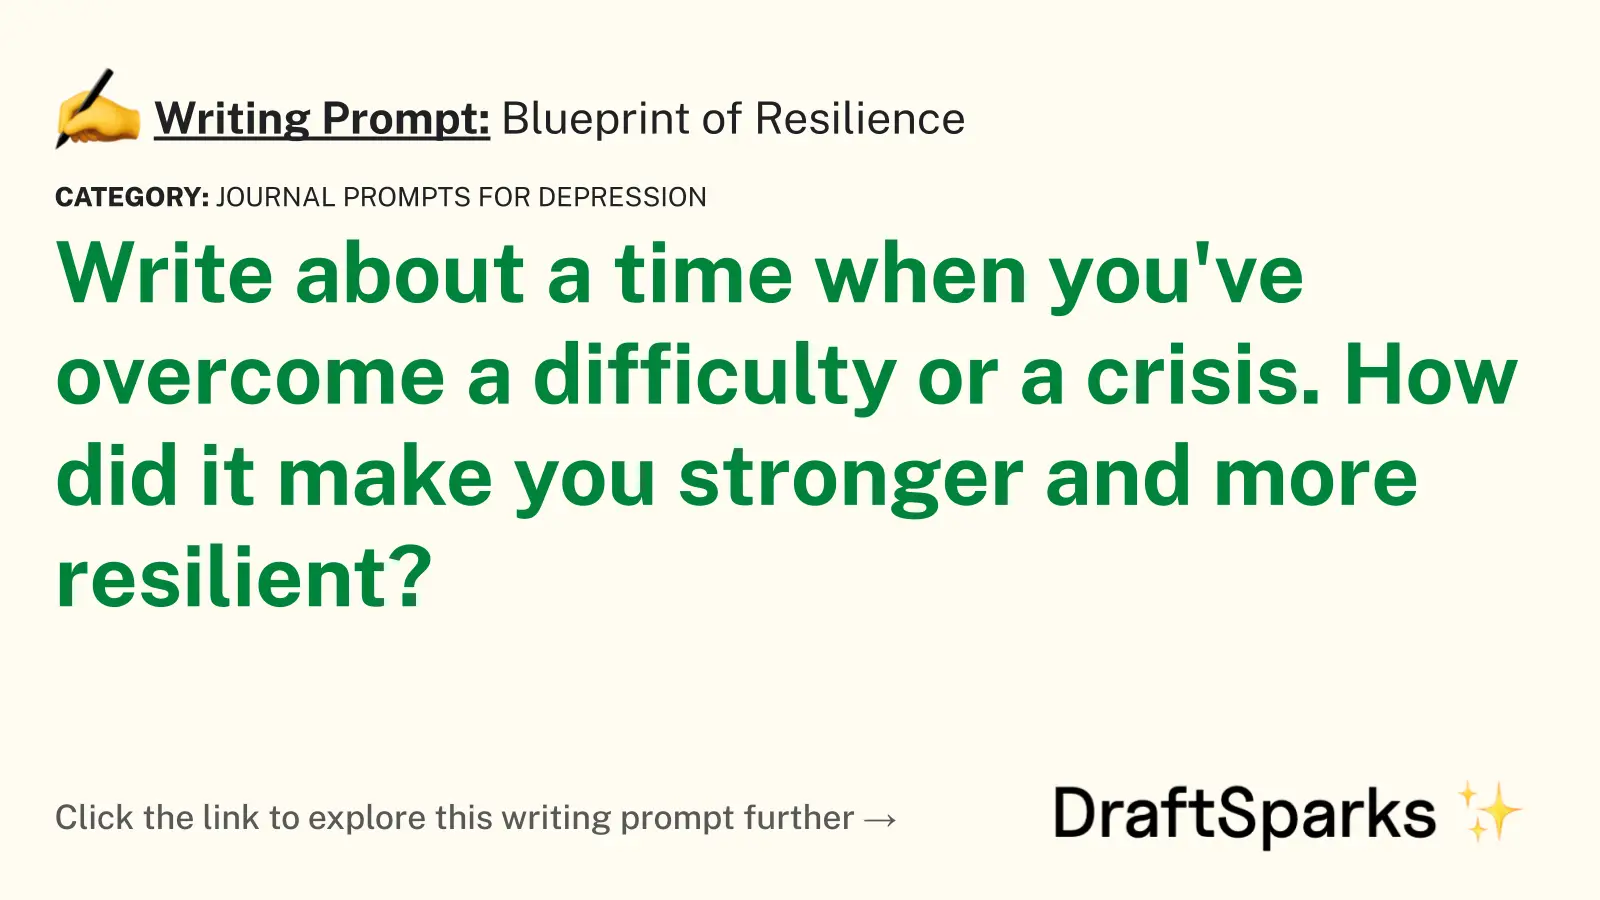 Blueprint of Resilience